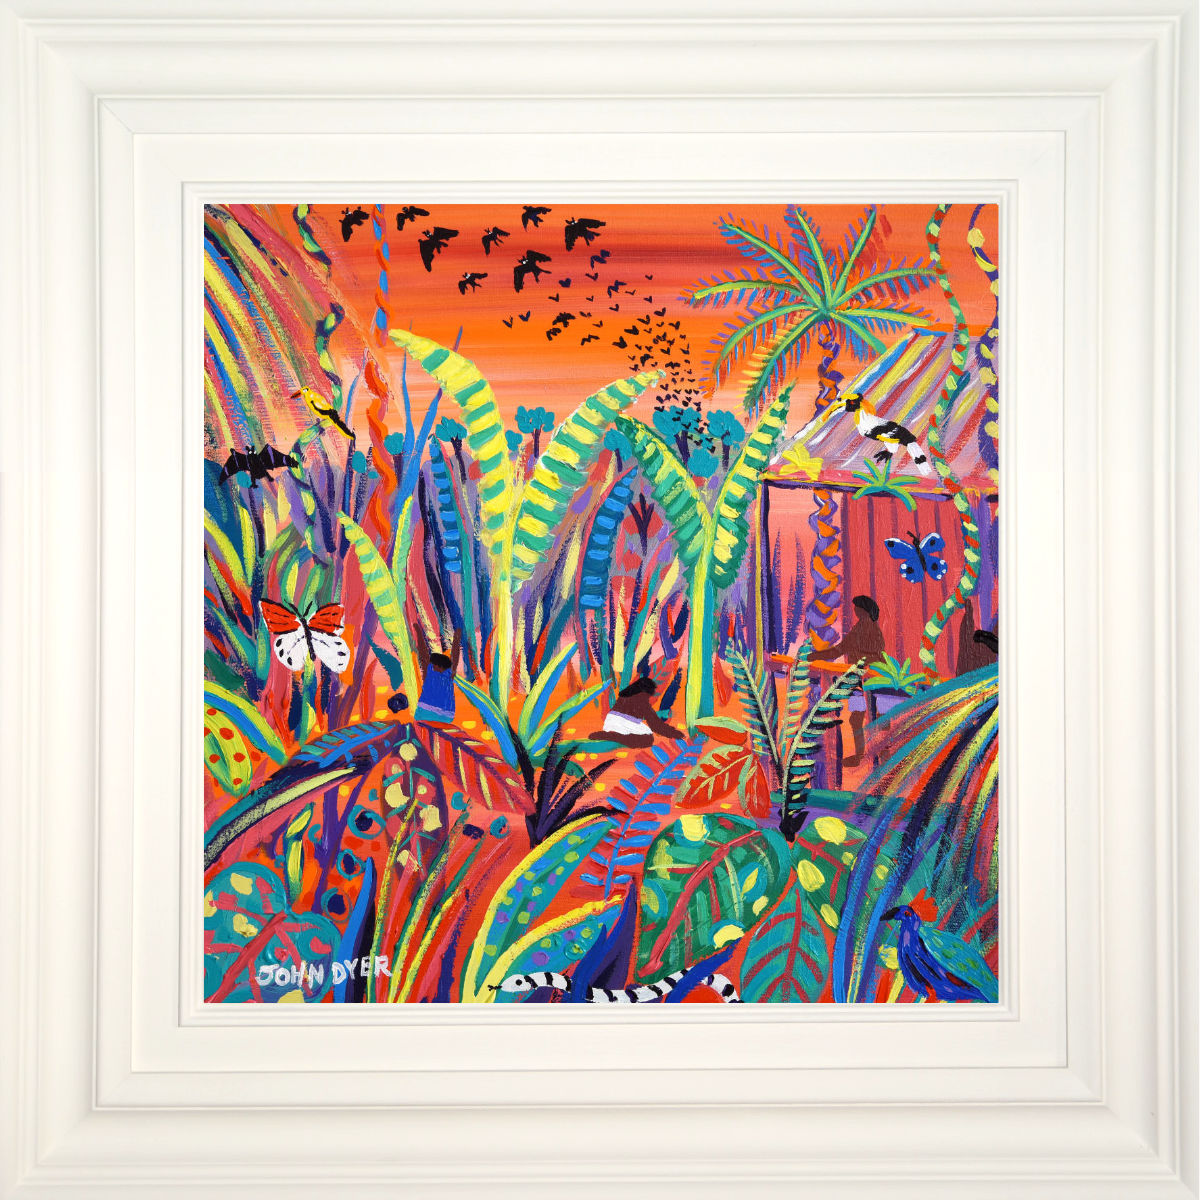 &#39;Borneo Rainforest Sunset&#39;, 18x18 inches acrylic on canvas. Borneo Jungle Painting by Environmental Artist John Dyer. Cornwall Art Gallery